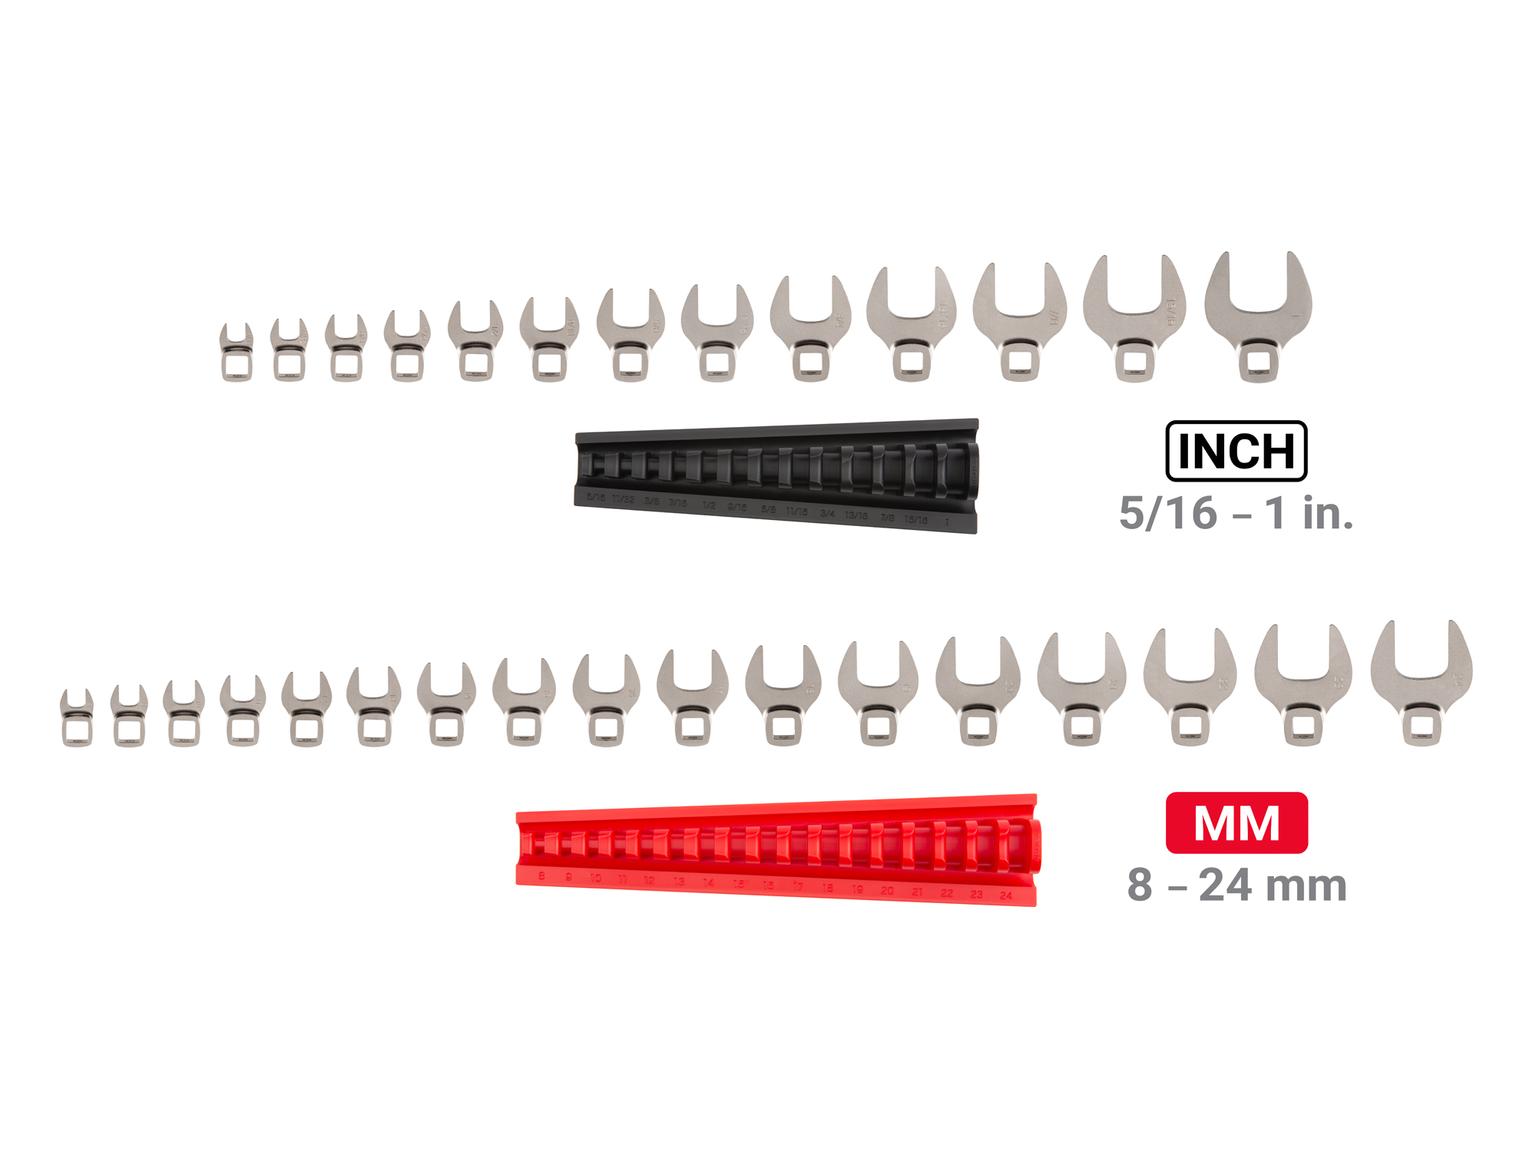 TEKTON WCF95301-T 3/8 Inch Drive Crowfoot Wrench Set with Rack, 30-Piece (5/16-1 in., 8-24 mm)